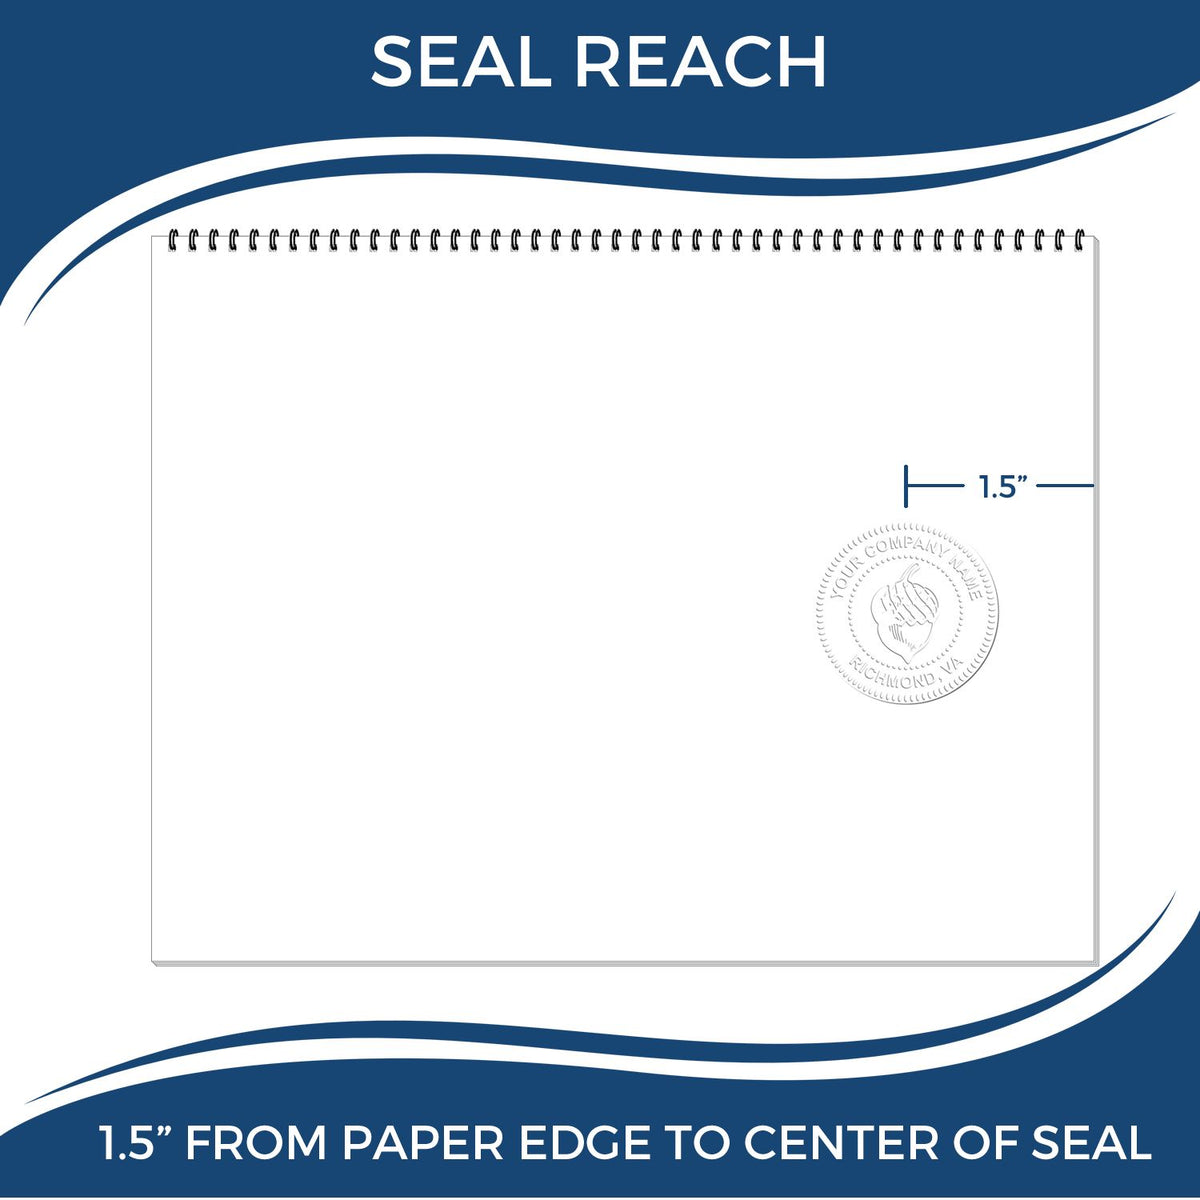 An infographic showing the seal reach which is represented by a ruler and a miniature seal image of the Gift Wisconsin Geologist Seal